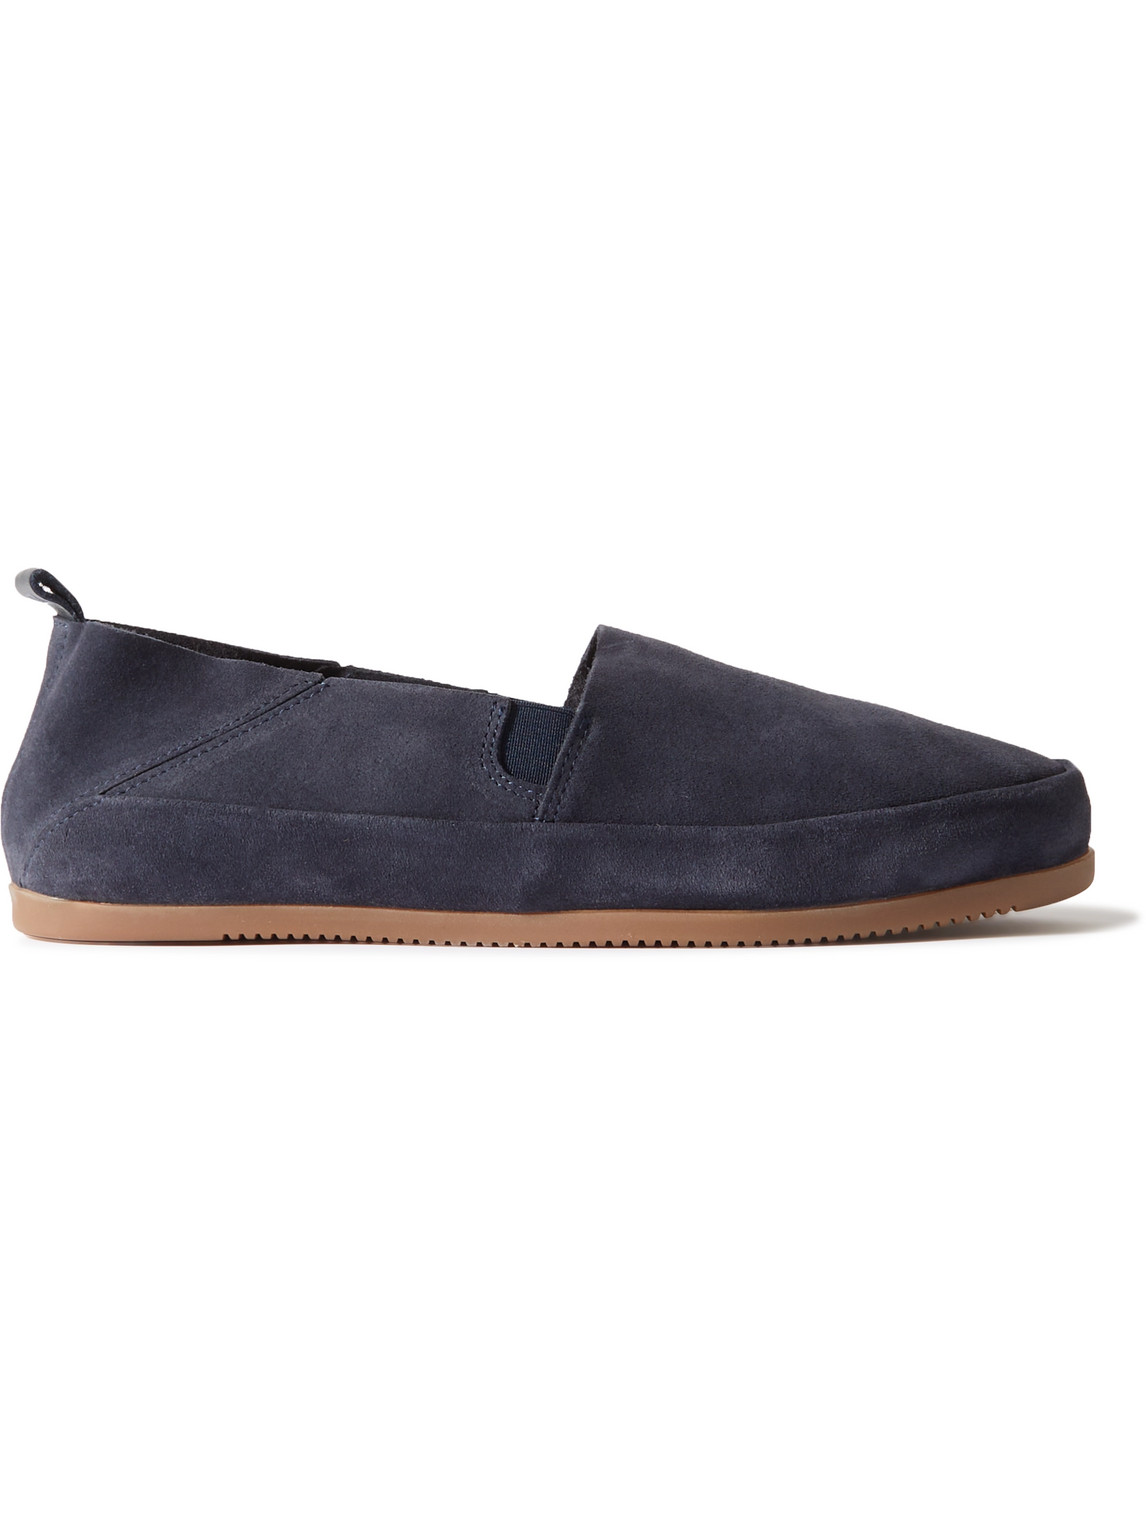 Collapsible-Heel Suede Loafers